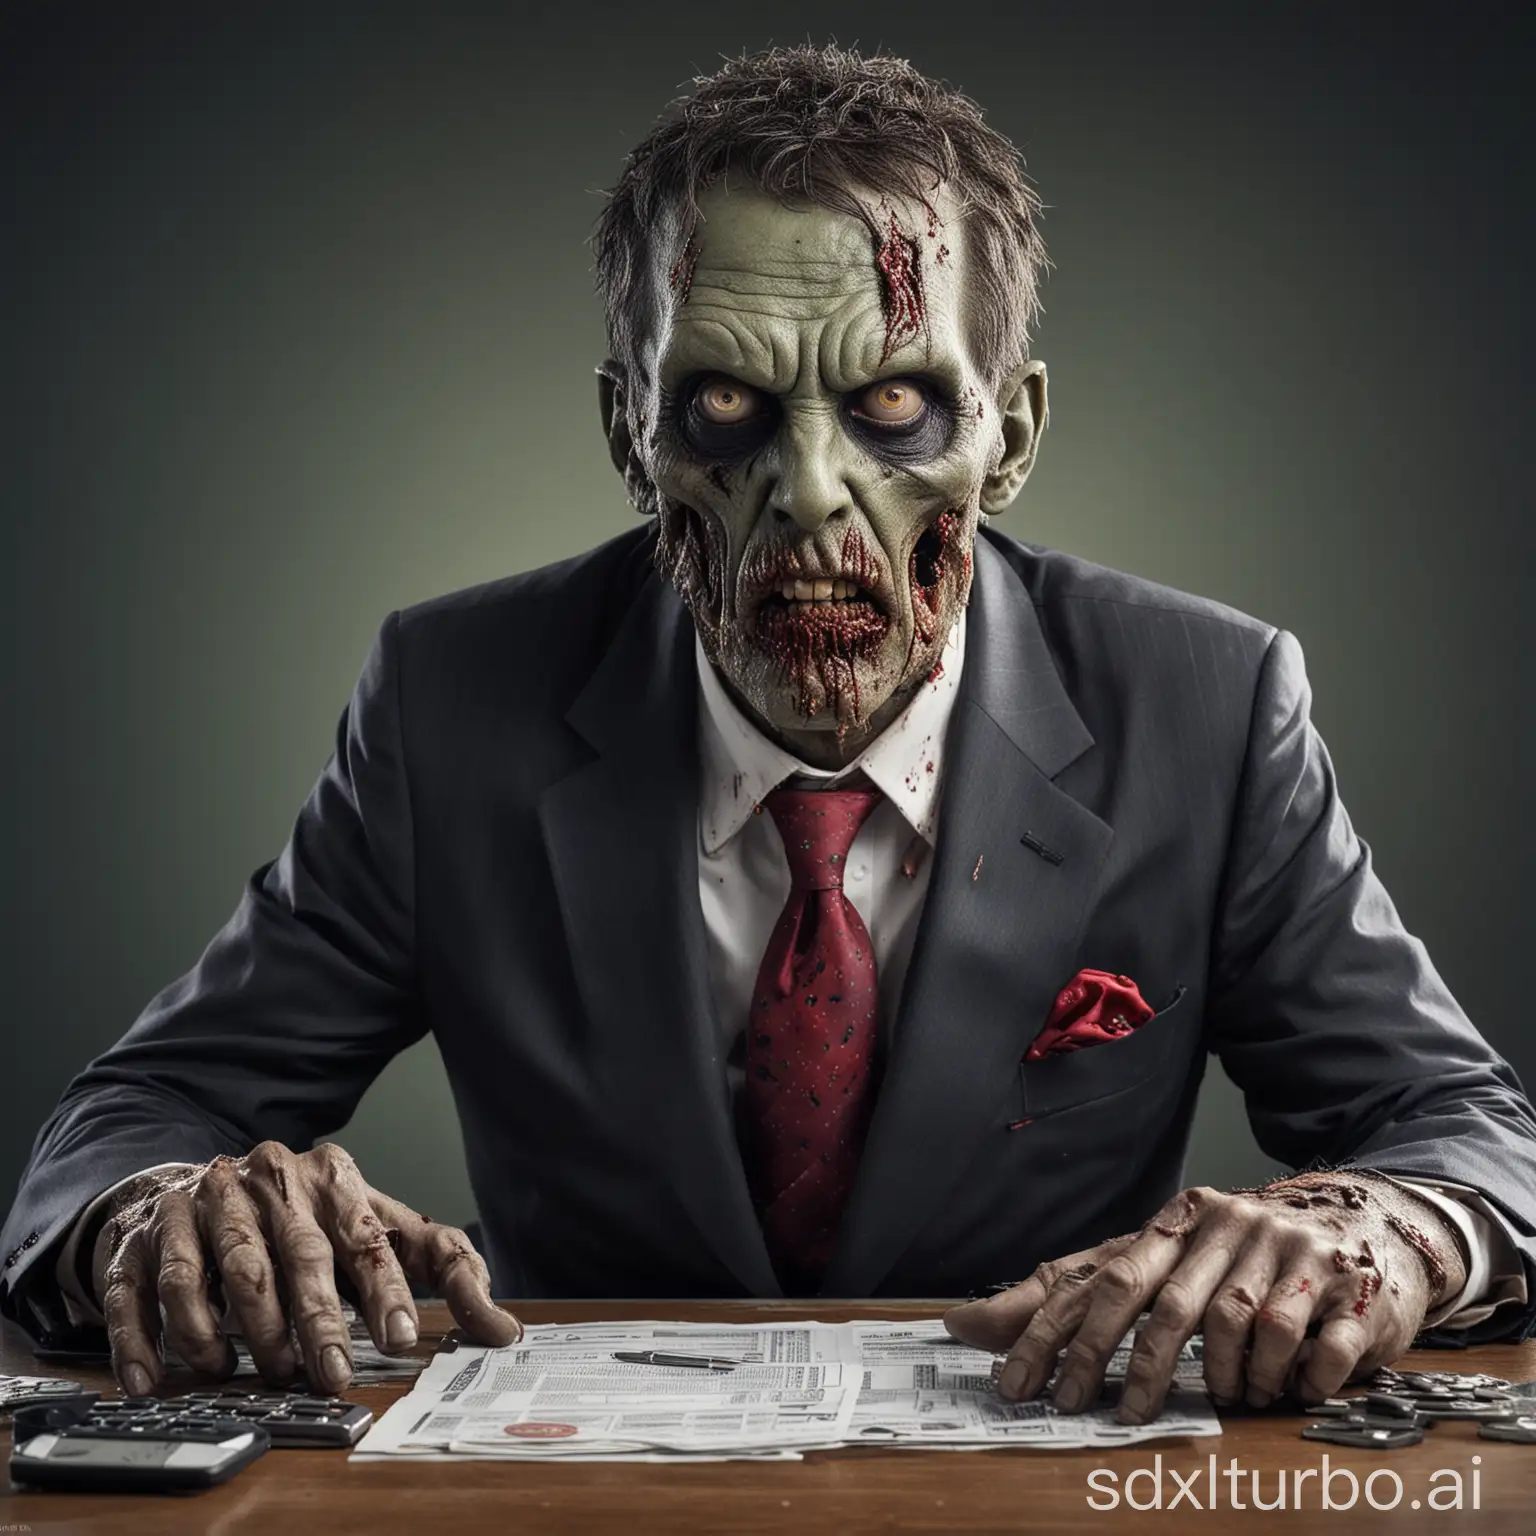 zombie, depicted as aruthless CEO of a Fortune 500 company, surrealism, Sony FE 70-200mm f/2.8 GM OSS Lens